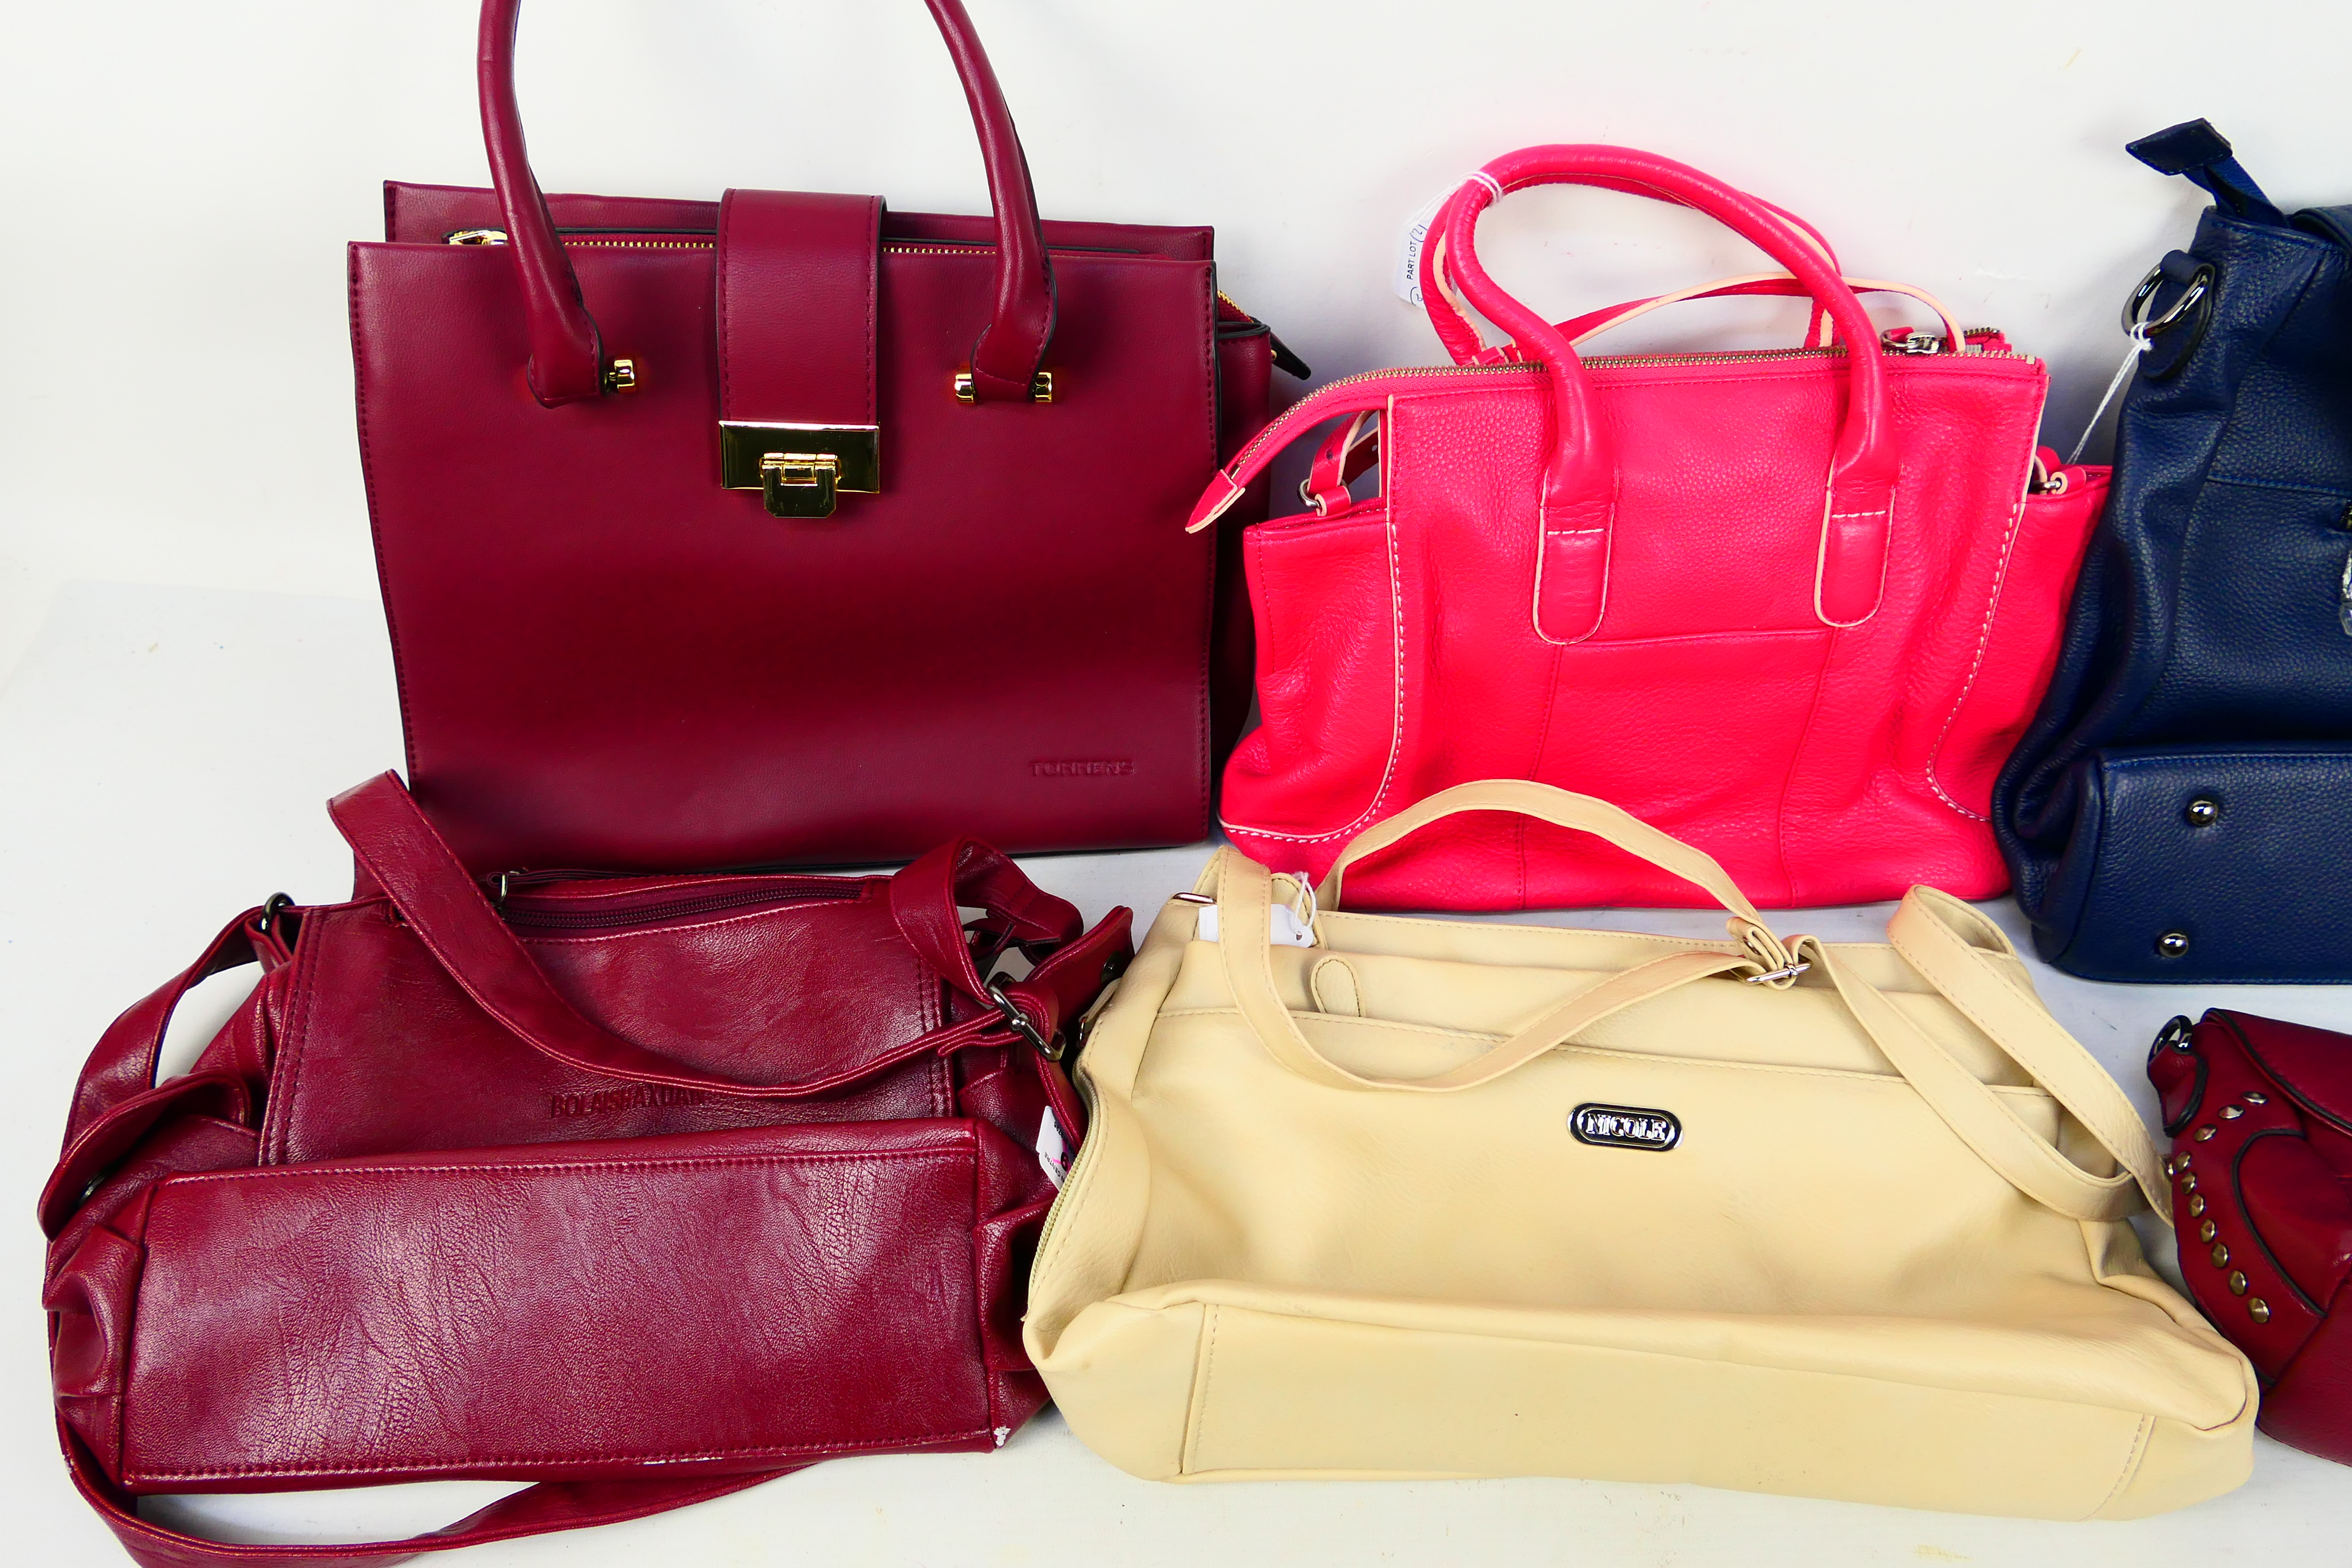 A collection of handbags to include Bolaishaxuan, S-Zone, Jindian and other. - Image 2 of 3